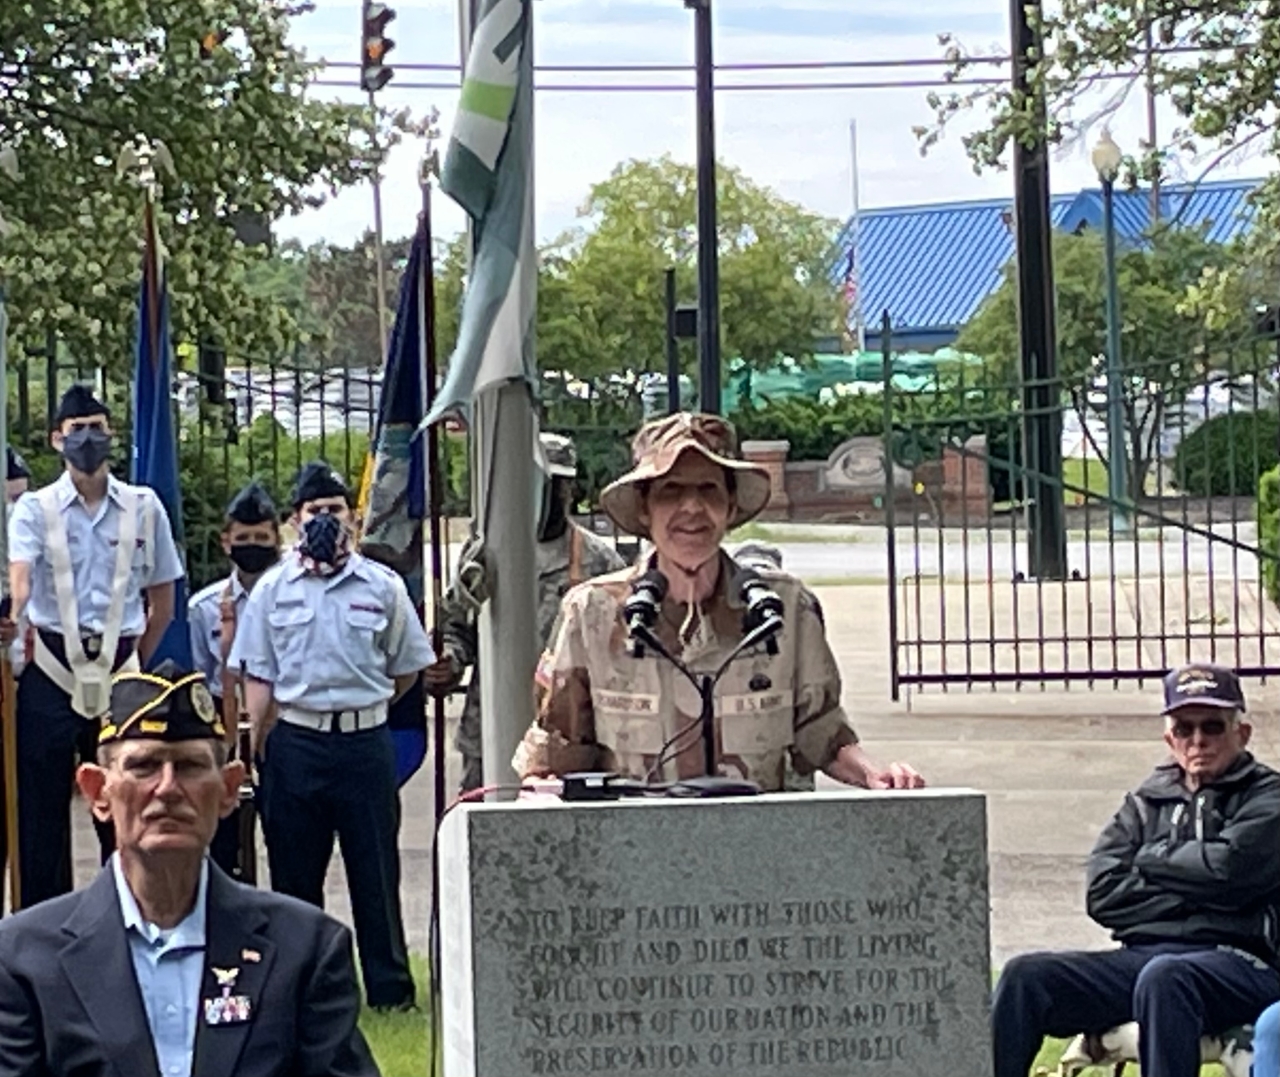 Rep. Richardson giving a speech as guest speaker at a Marysville Memorial Day ceremony